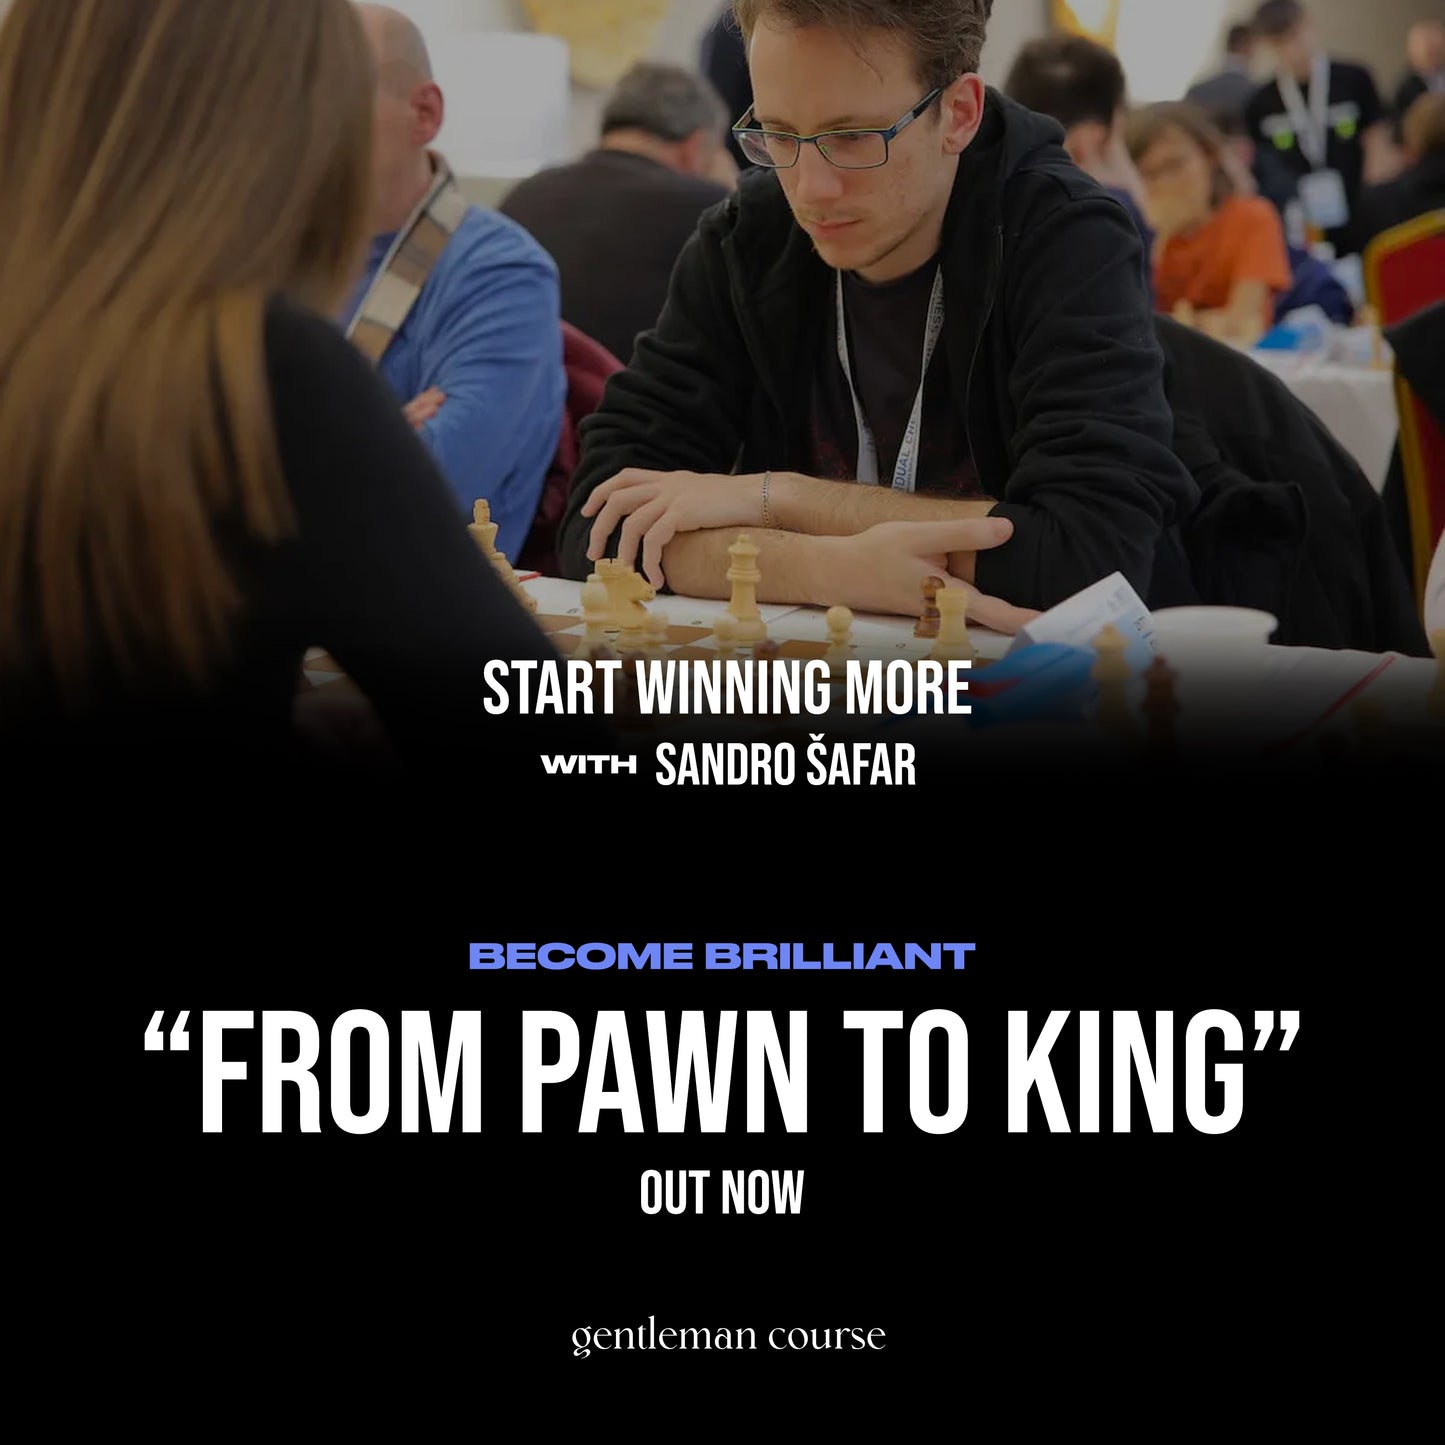 FROM PAWN TO KING